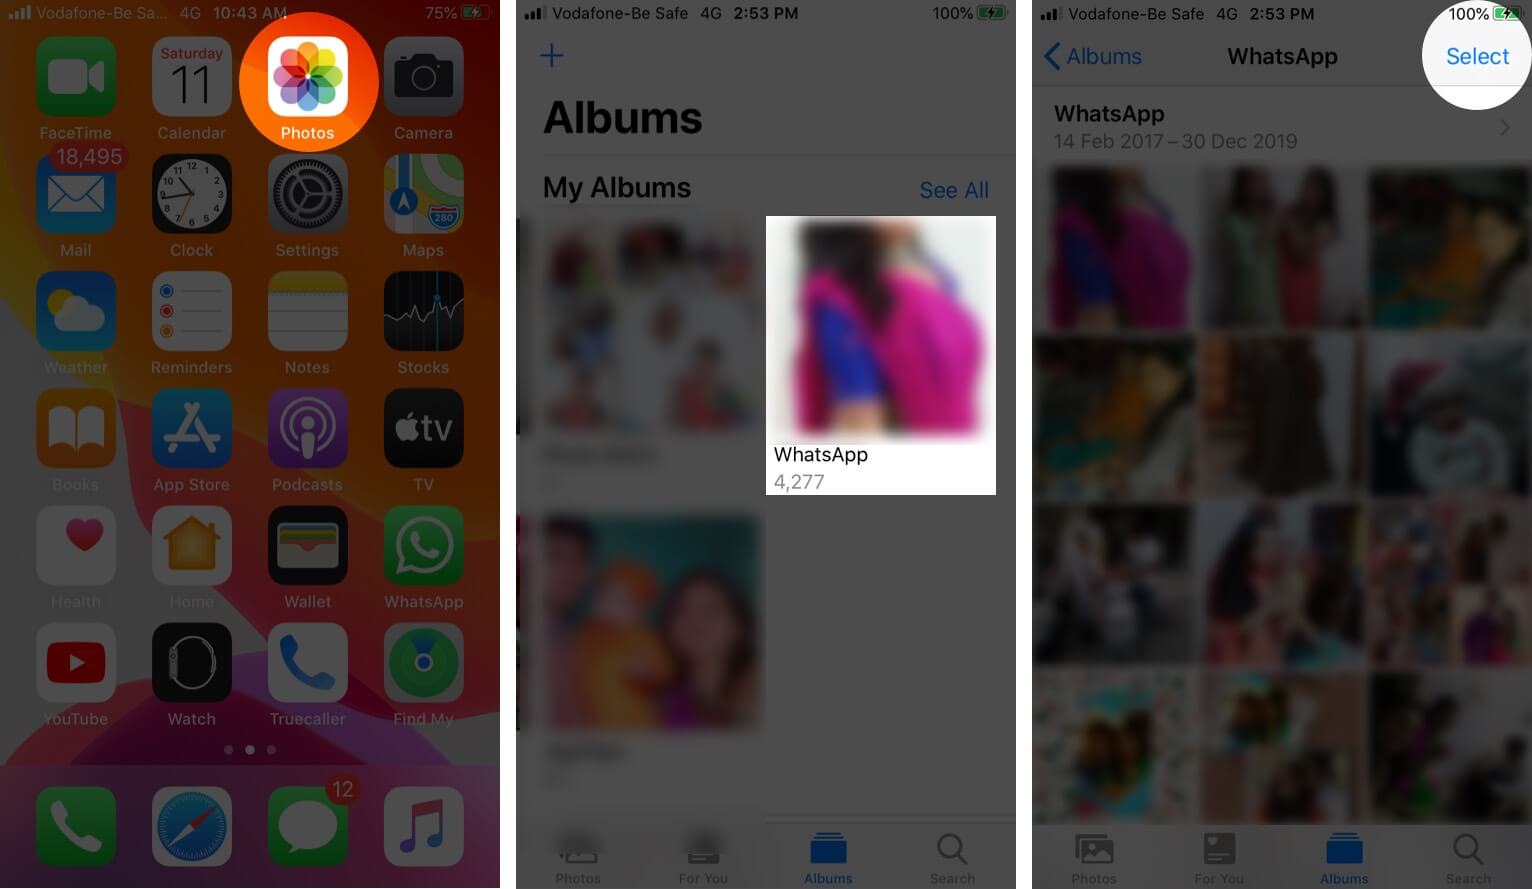 Open Photos App Tap on WhatsApp Album and Tap on Select